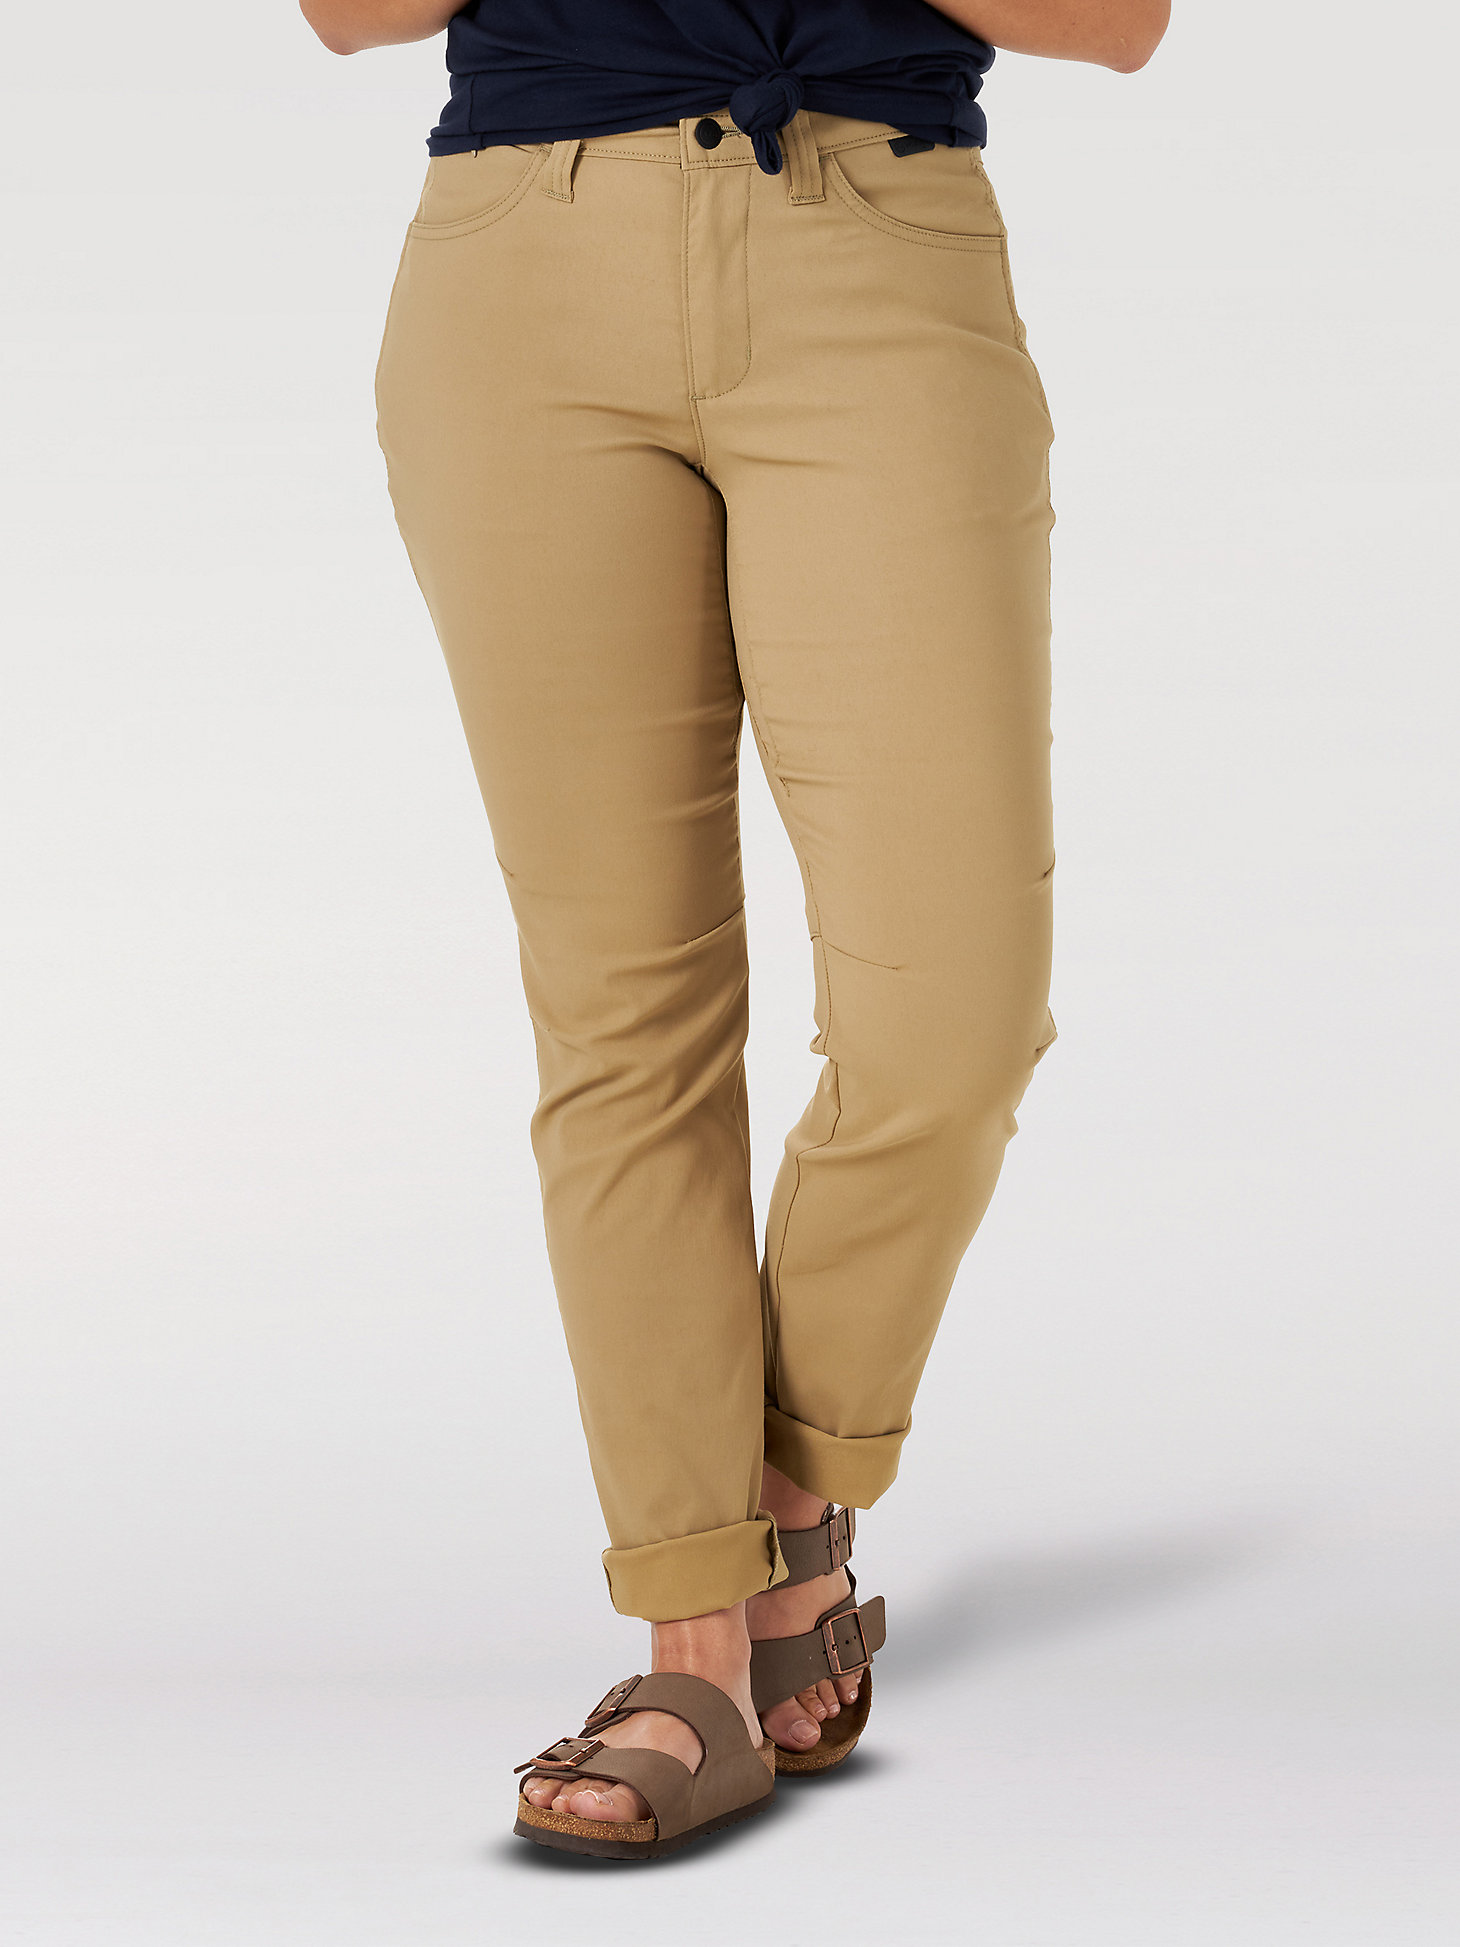 Brown Slacks and Chinos Straight-leg trousers Womens Clothing Trousers Le Fate Synthetic Trouser in Dark Brown 